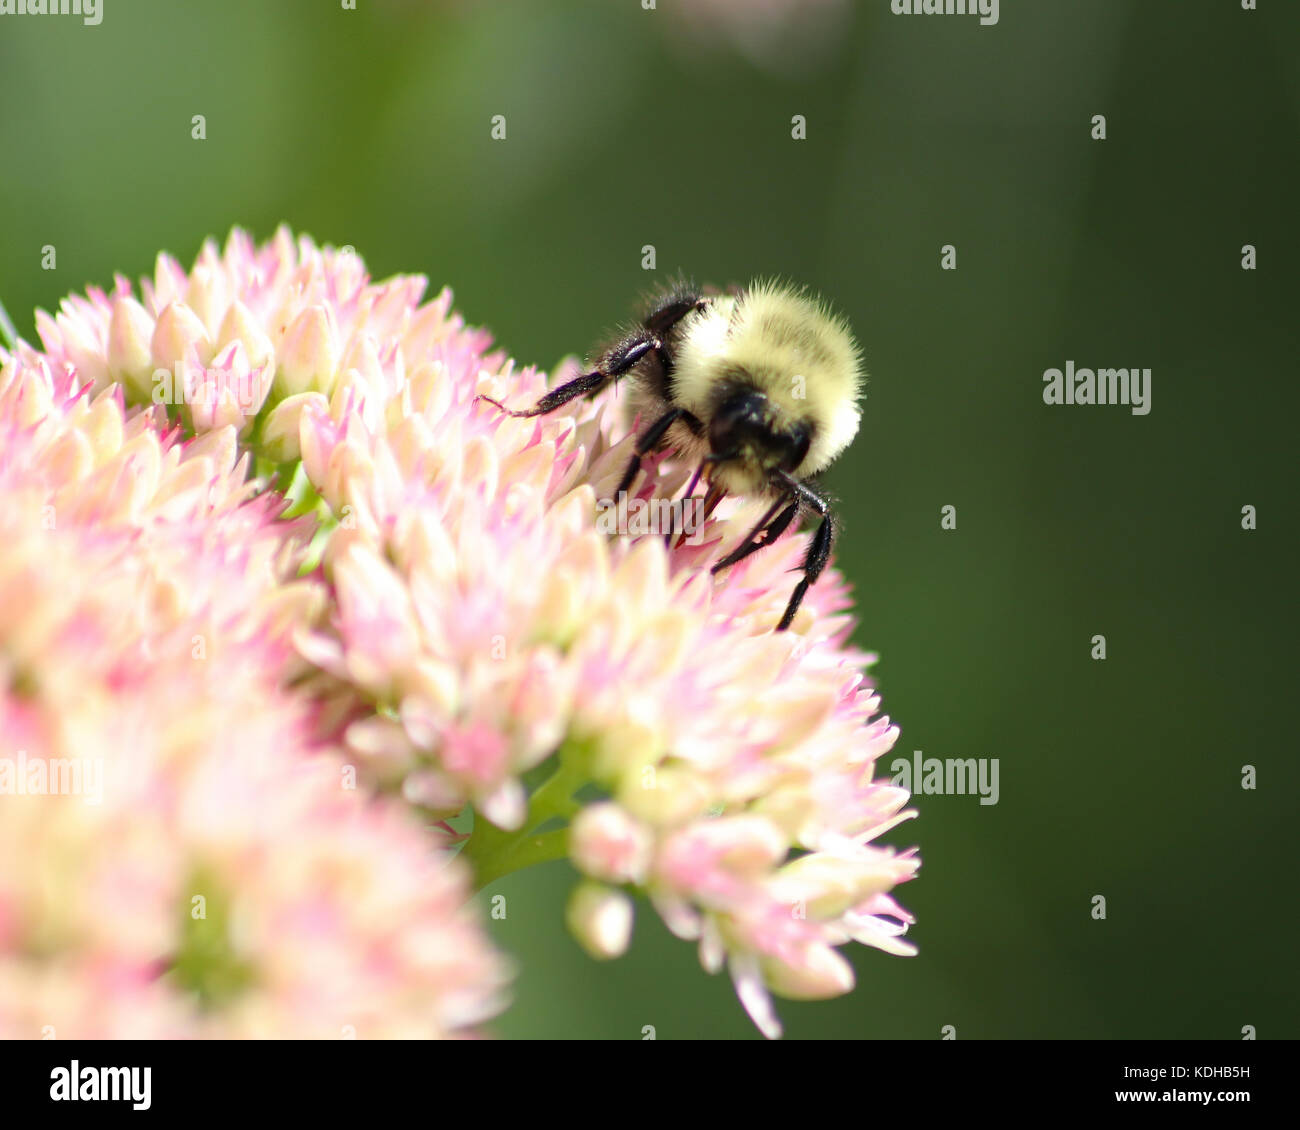 Closeup of Bumble Bee at work gathering pollen on a pretty pink Sedum flowering plant Stock Photo